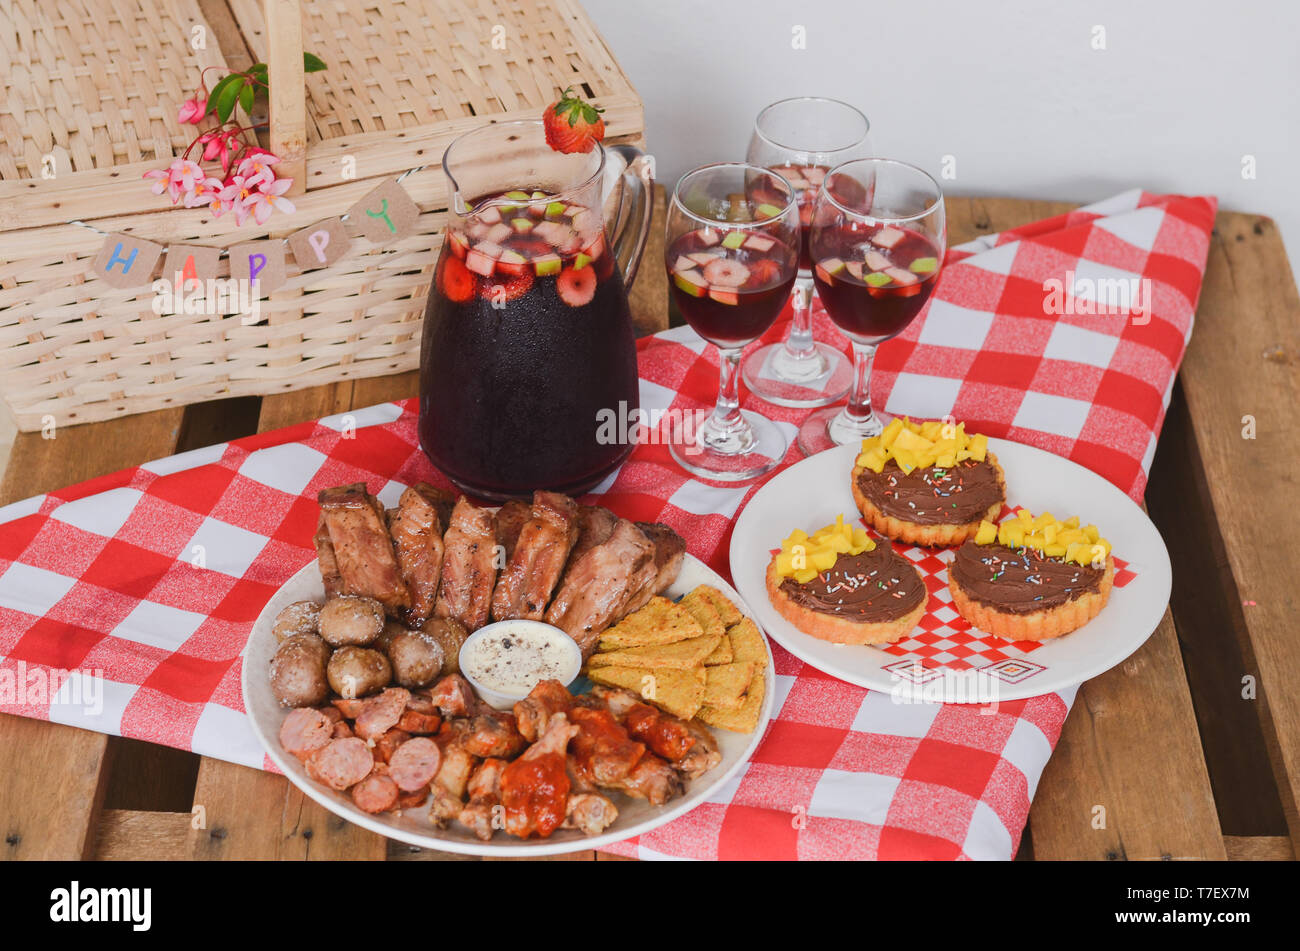 https://c8.alamy.com/comp/T7EX7M/food-and-drinks-picnic-on-rustic-wooden-table-with-checkered-tablecloth-T7EX7M.jpg